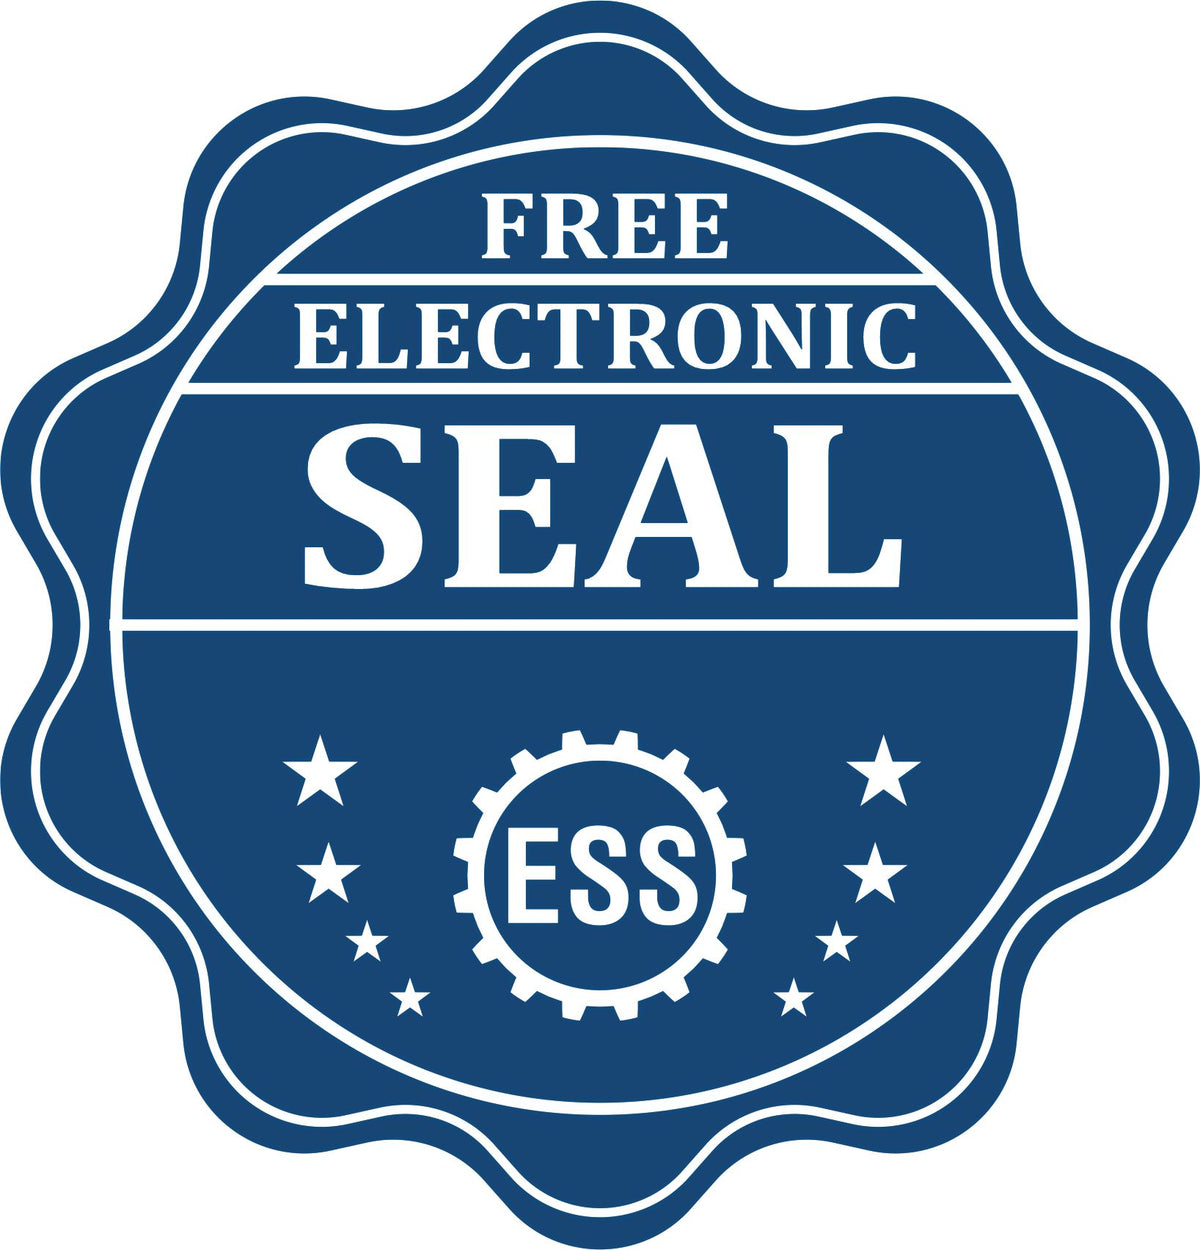 A badge showing a free electronic seal for the Premium MaxLight Pre-Inked New York Geology Stamp with stars and the ESS gear on the emblem.